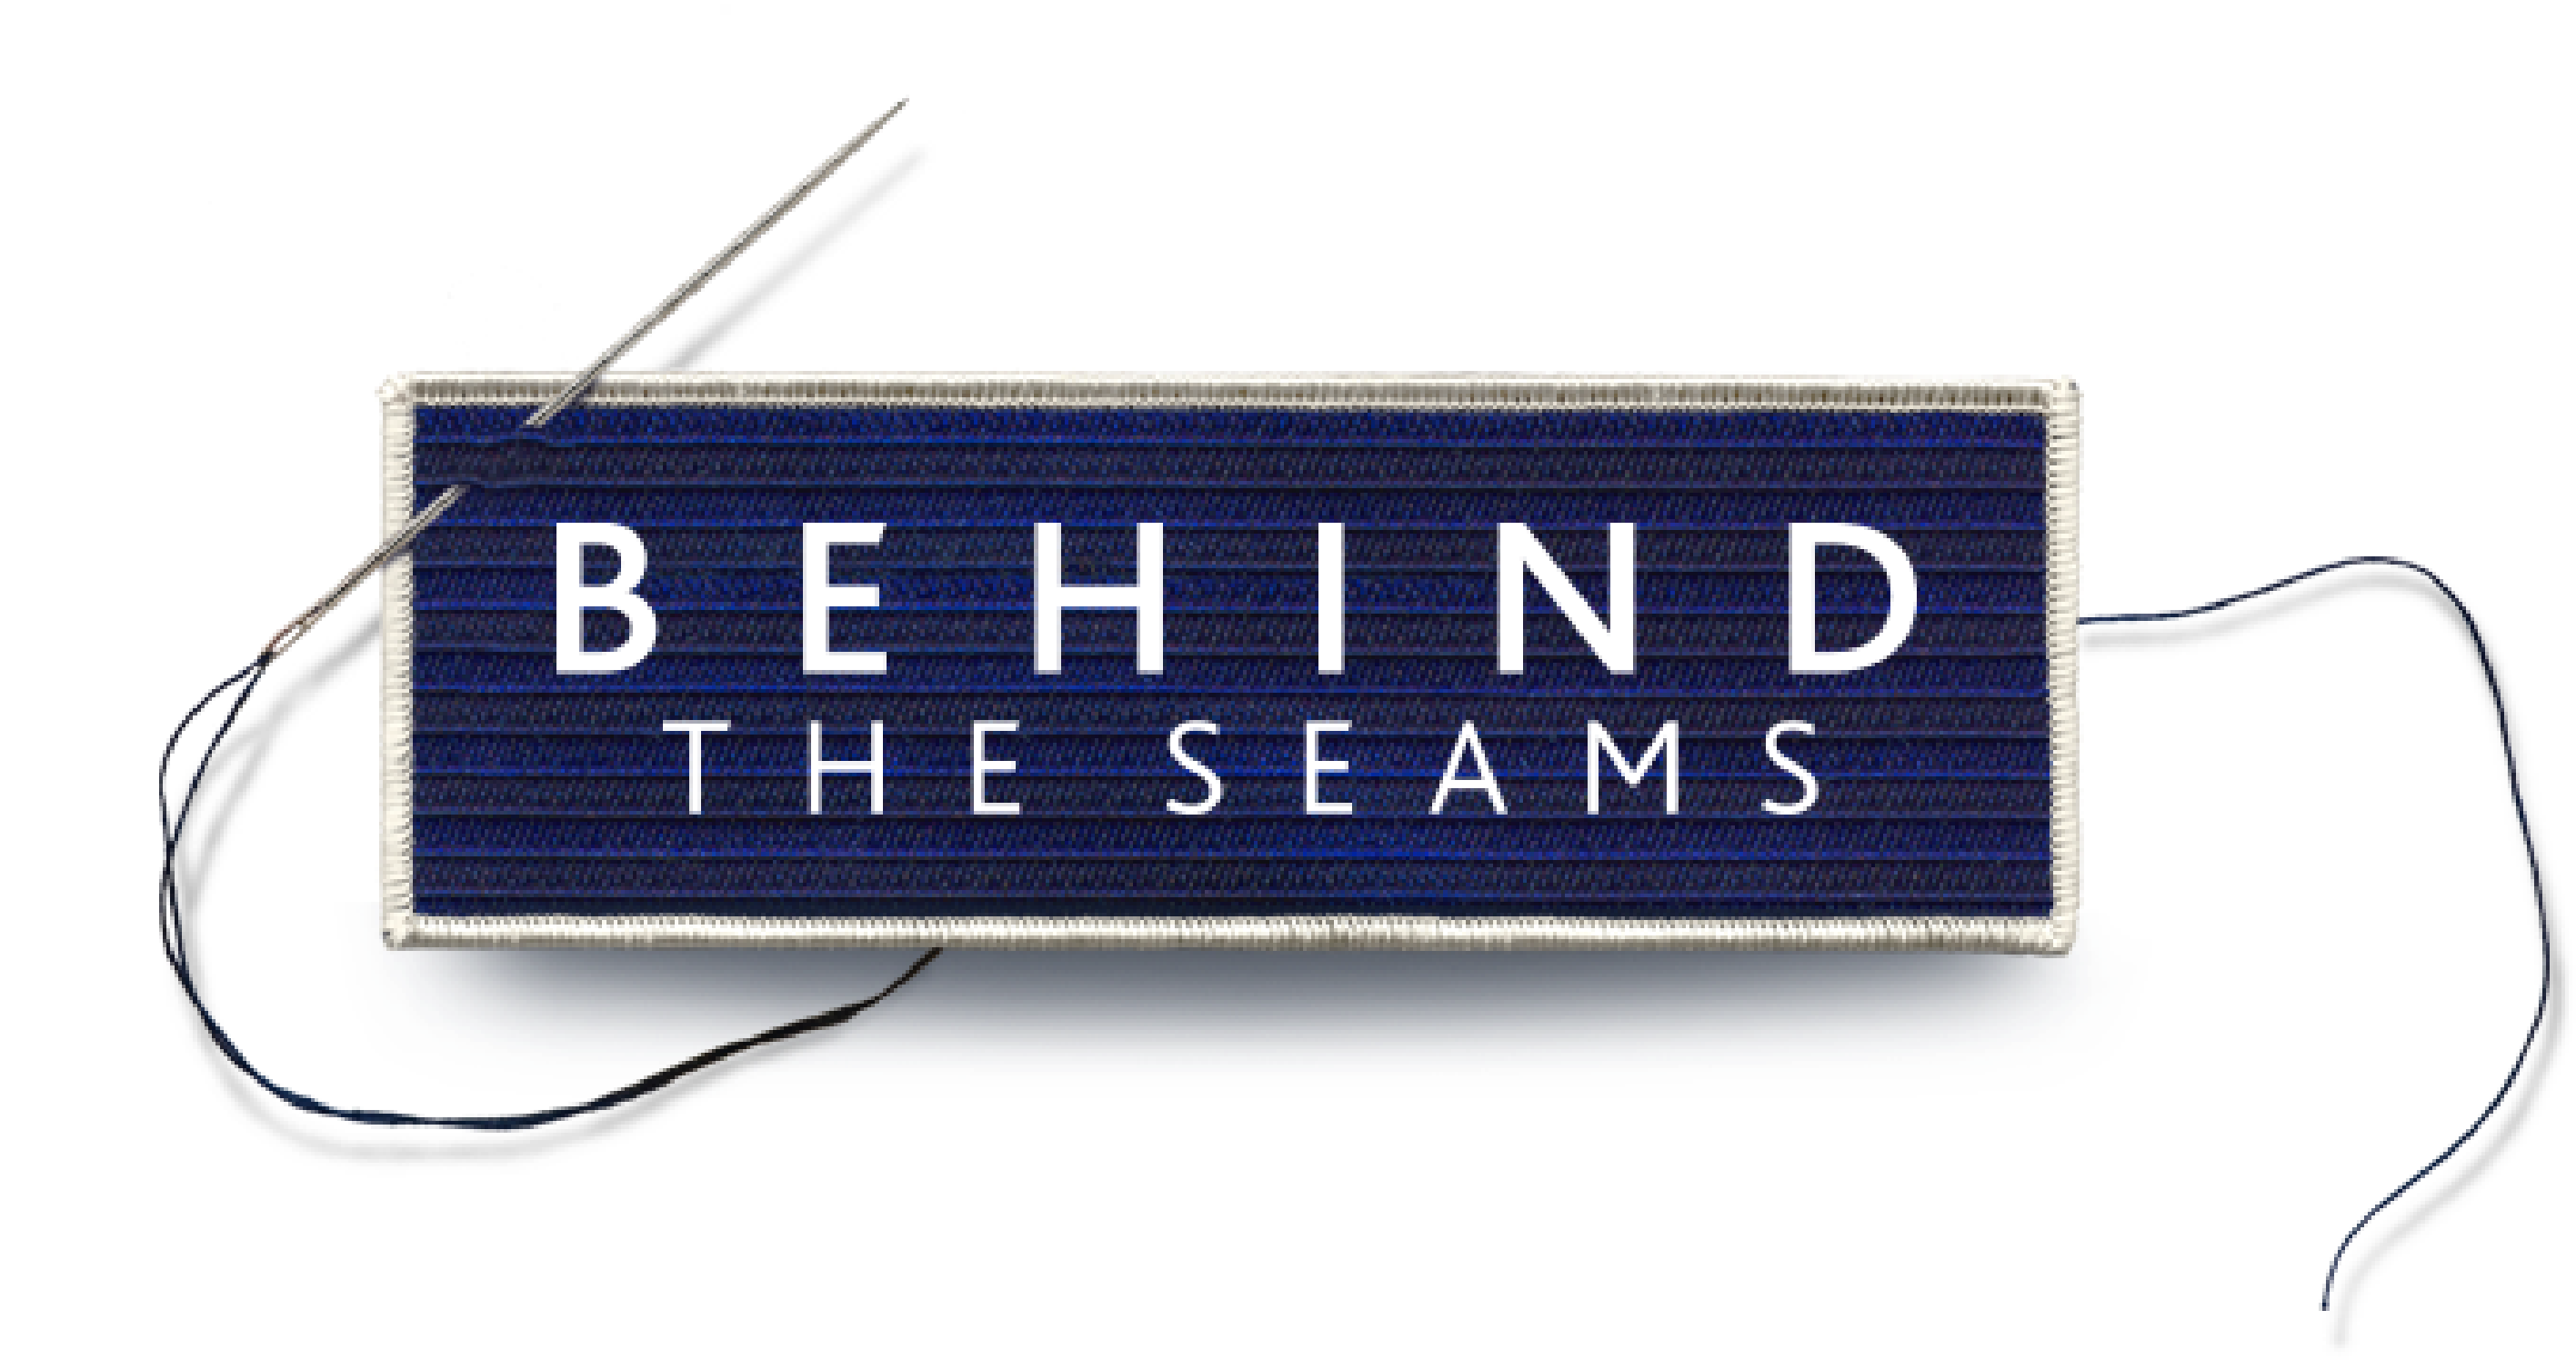 Founded & hosted by Sal Lauretta for Men, The DSM Group, & Bottagra Restaurant, the 7th Annual 'Behind the Seams' Fashion Show drew a record crowd & raised record funds for Eva's Village on May 23.